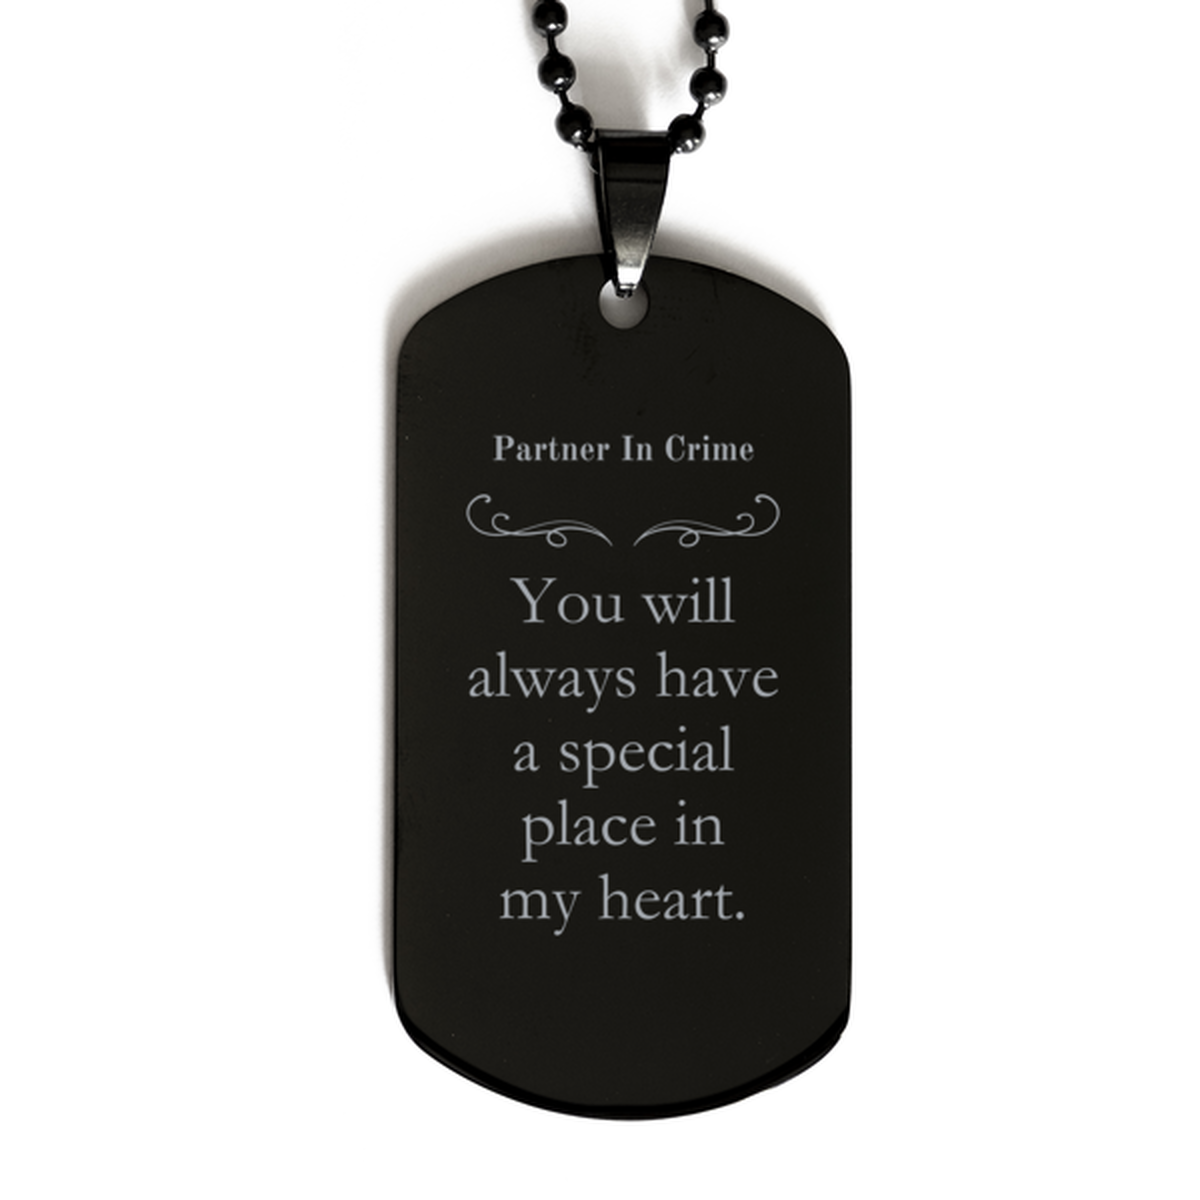 Engraved Black Dog Tag Partner In Crime You will always have a special place in my heart. Unique Birthday Gift for Him or Her